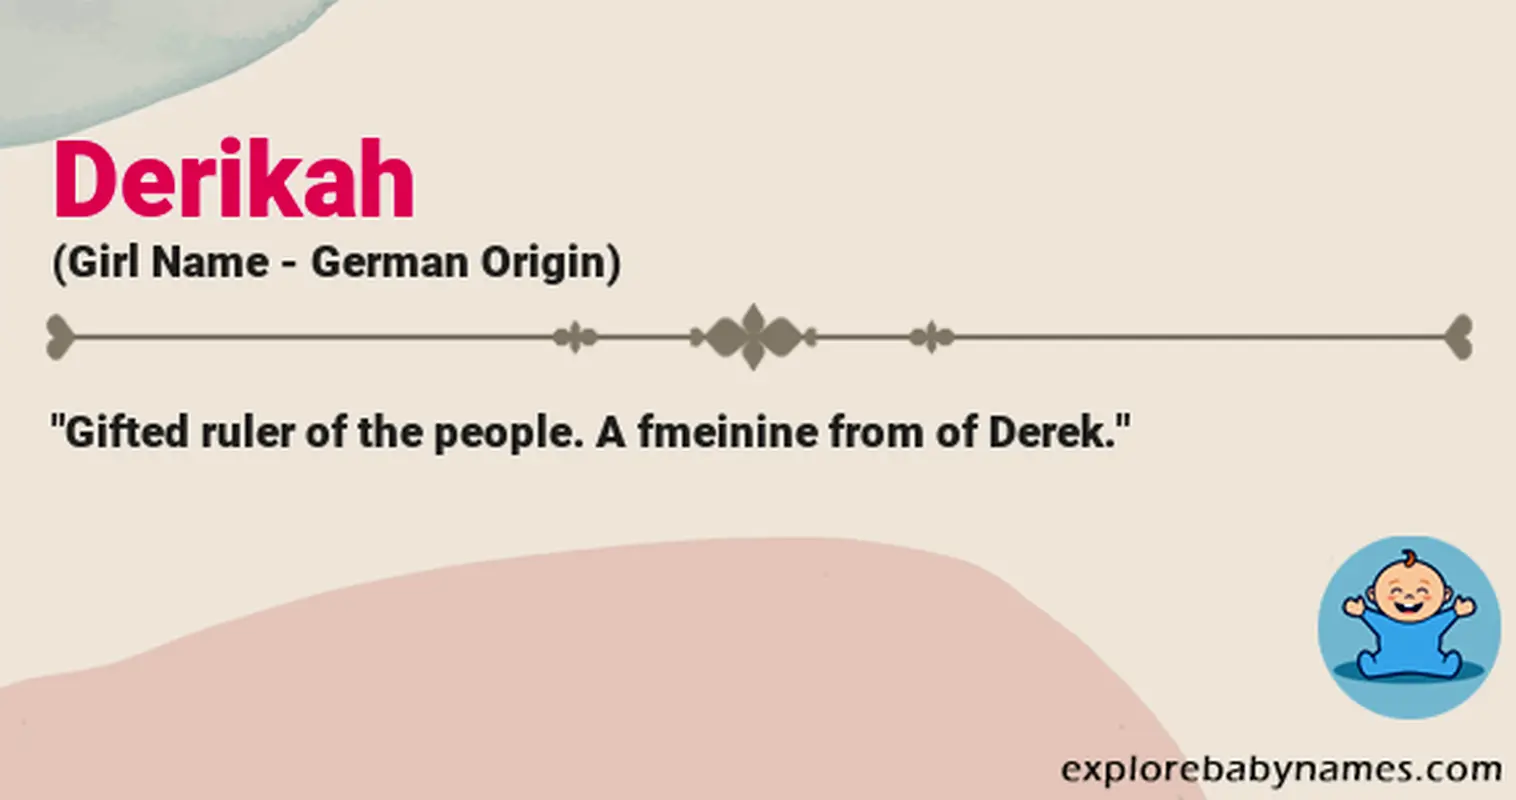 Meaning of Derikah